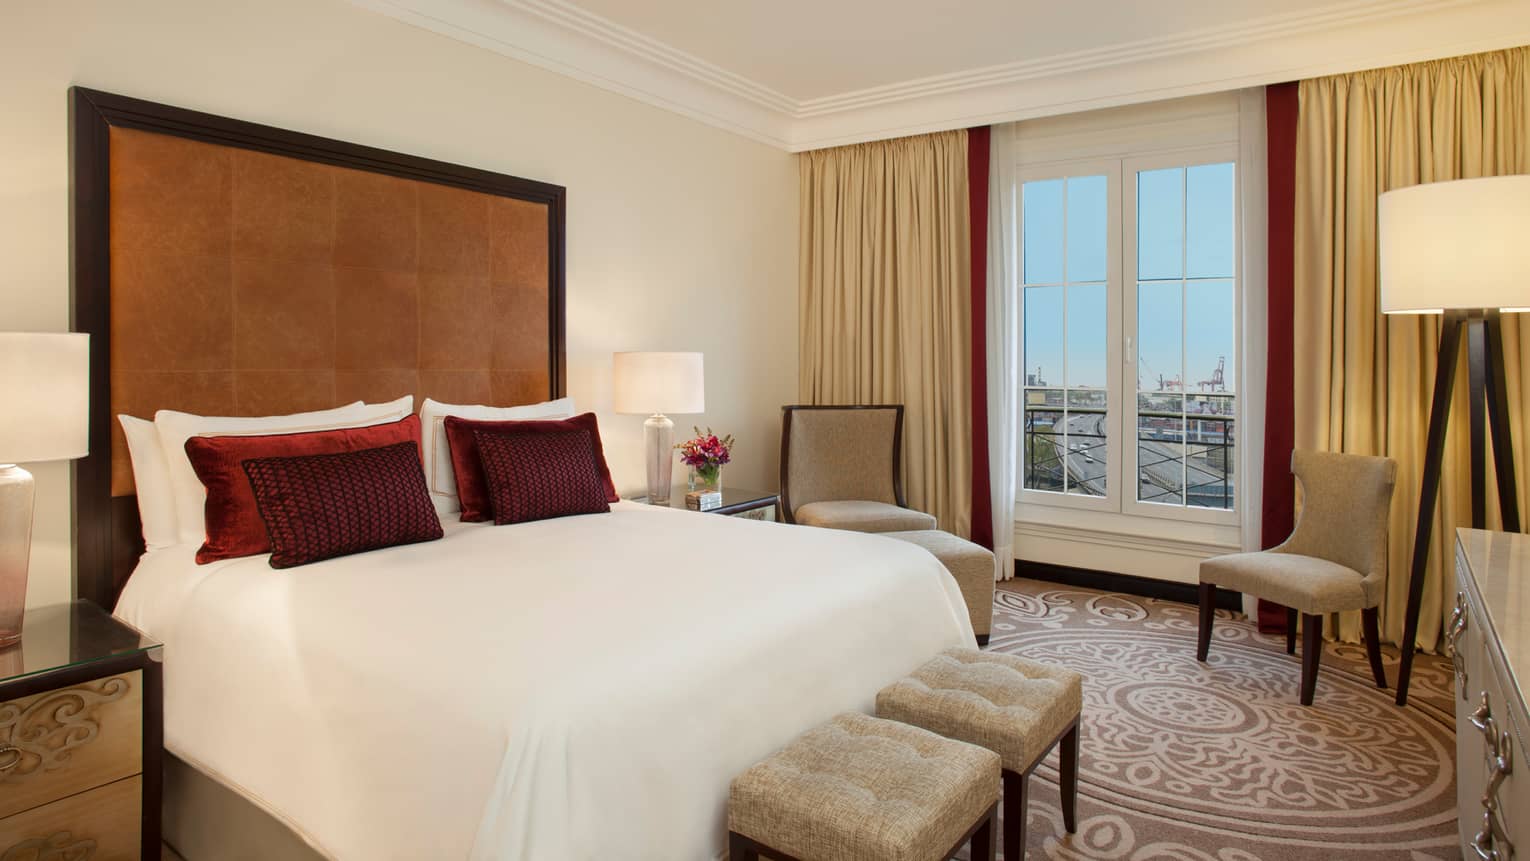 City-View One Bedroom Suite bed with tall padded leather headboard, small red accent pillows, two chairs by window